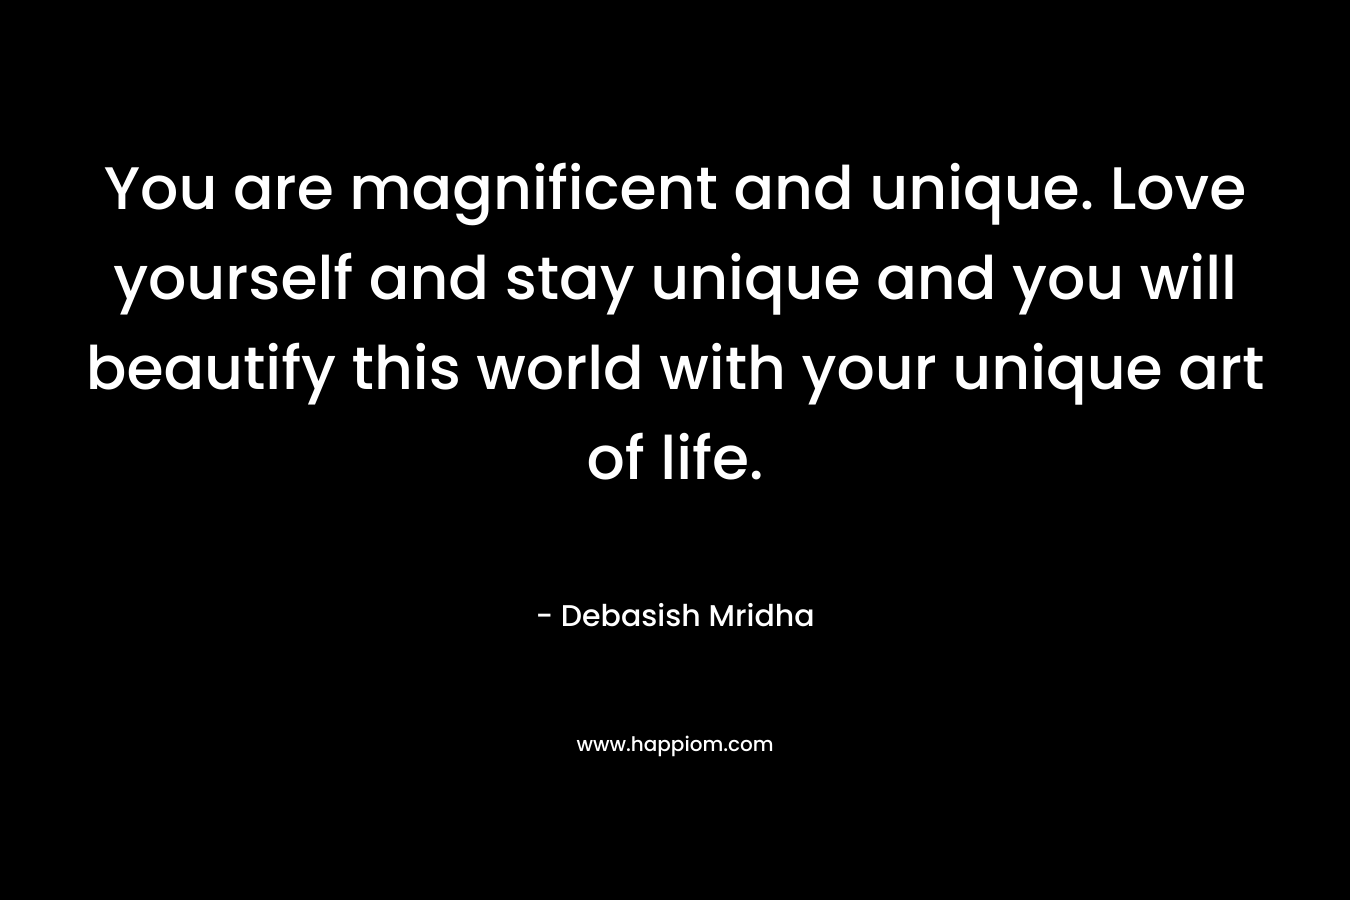 You are magnificent and unique. Love yourself and stay unique and you will beautify this world with your unique art of life. – Debasish Mridha